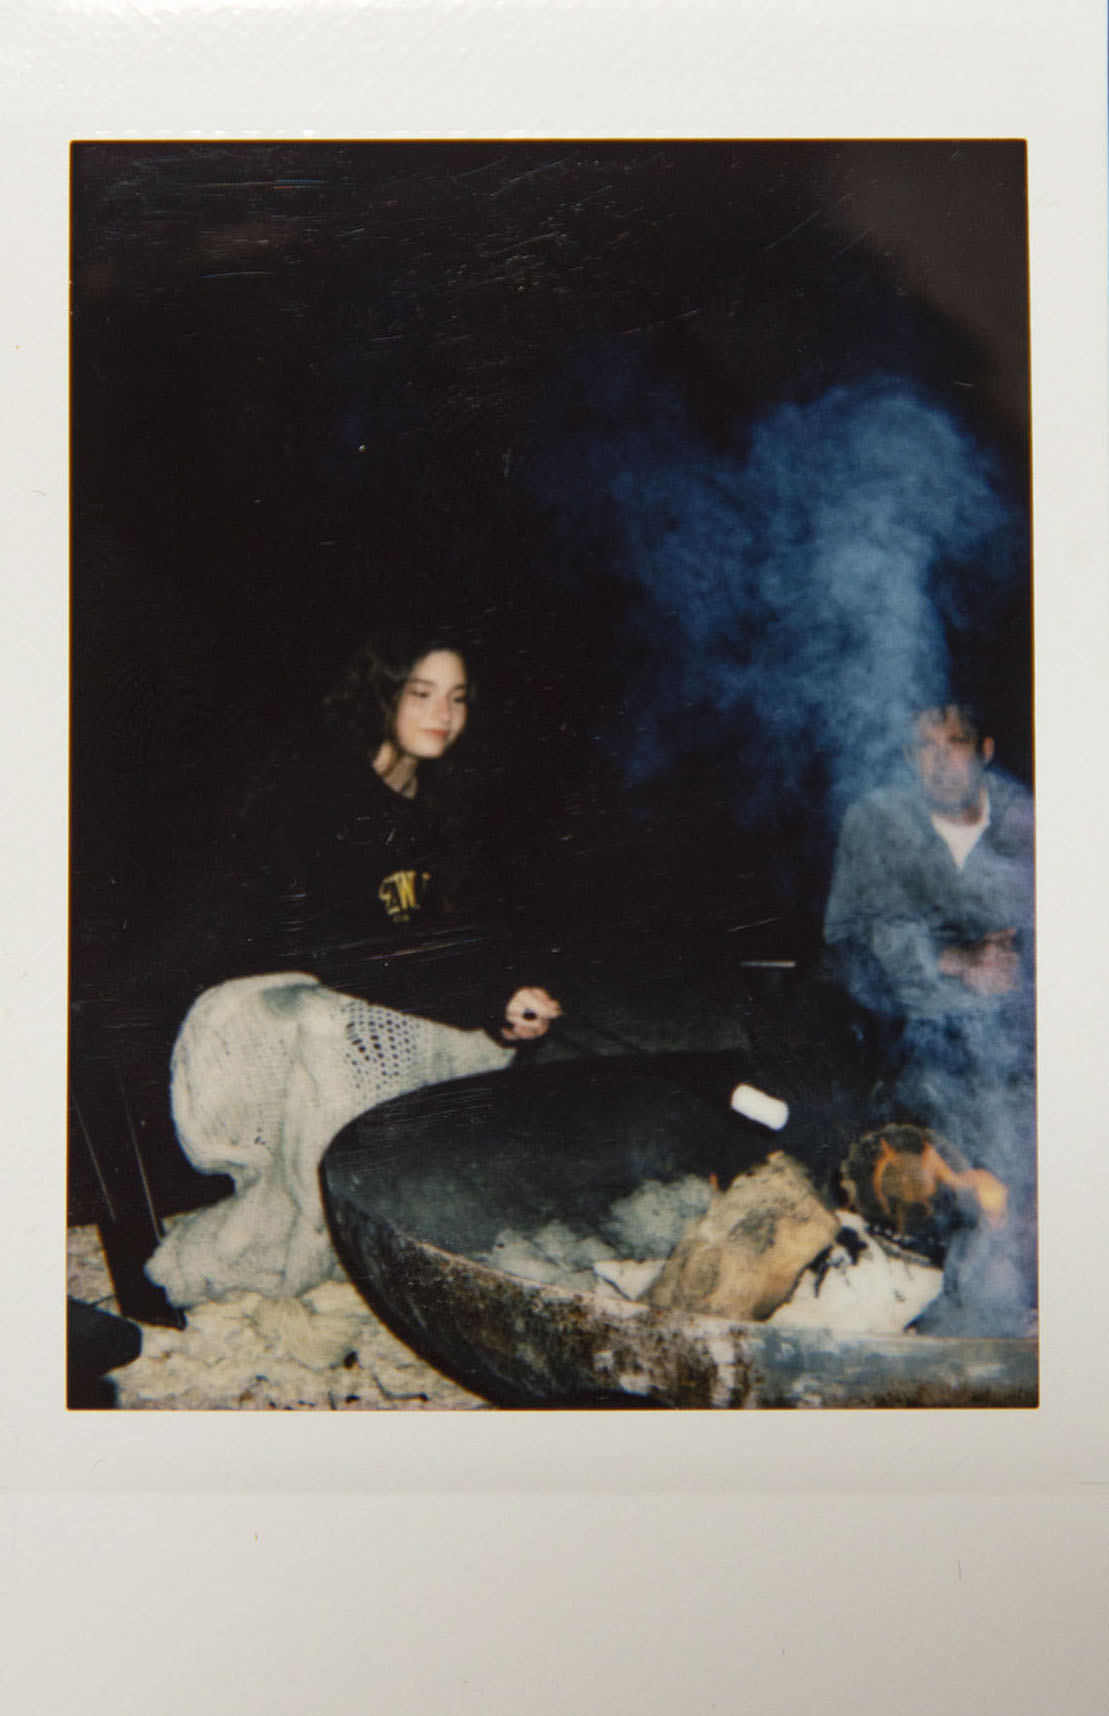 A young woman sits in the smoke of a campfire